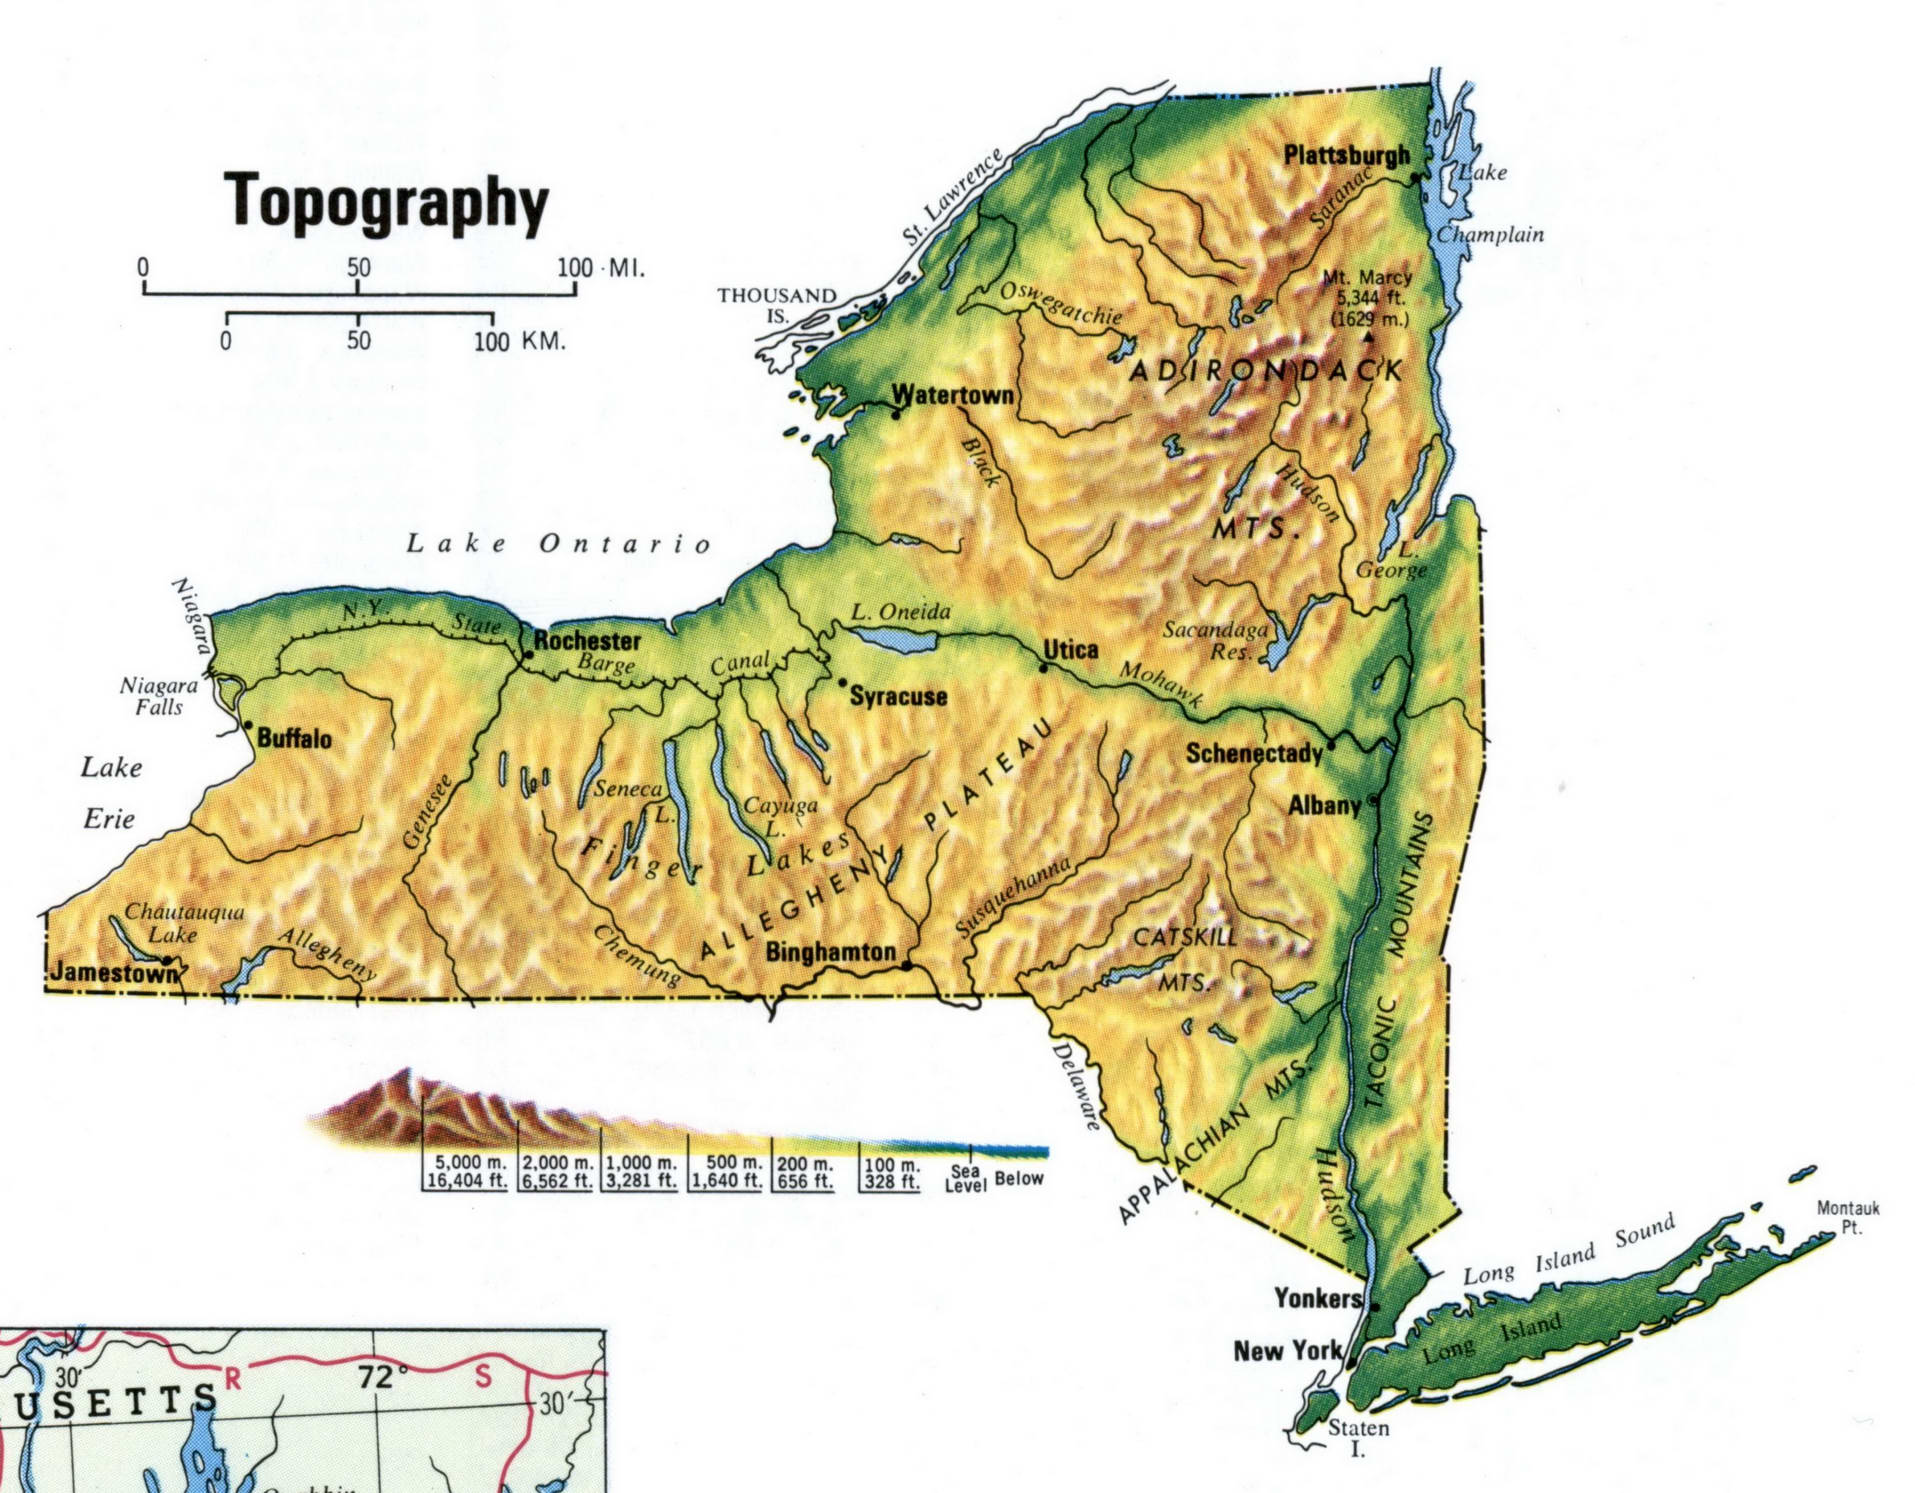 Topographical map of New York state